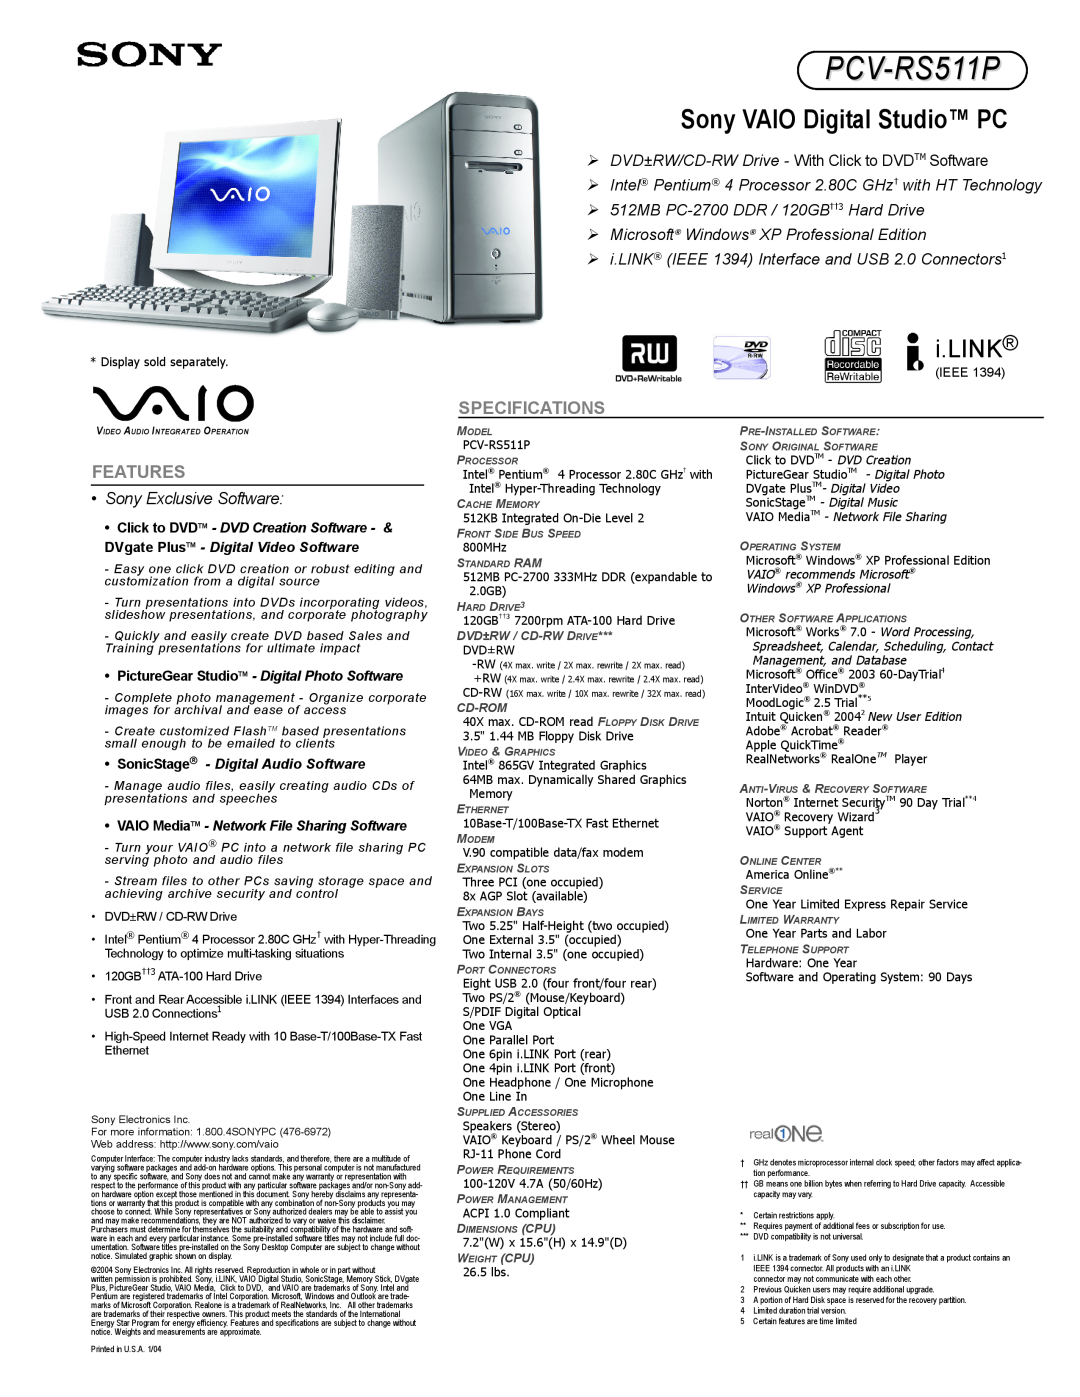 Sony PCV-RS511P specifications Sony VAIO Digital Studio PC, i.LINK, Specifications, Features, Sony Exclusive Software 